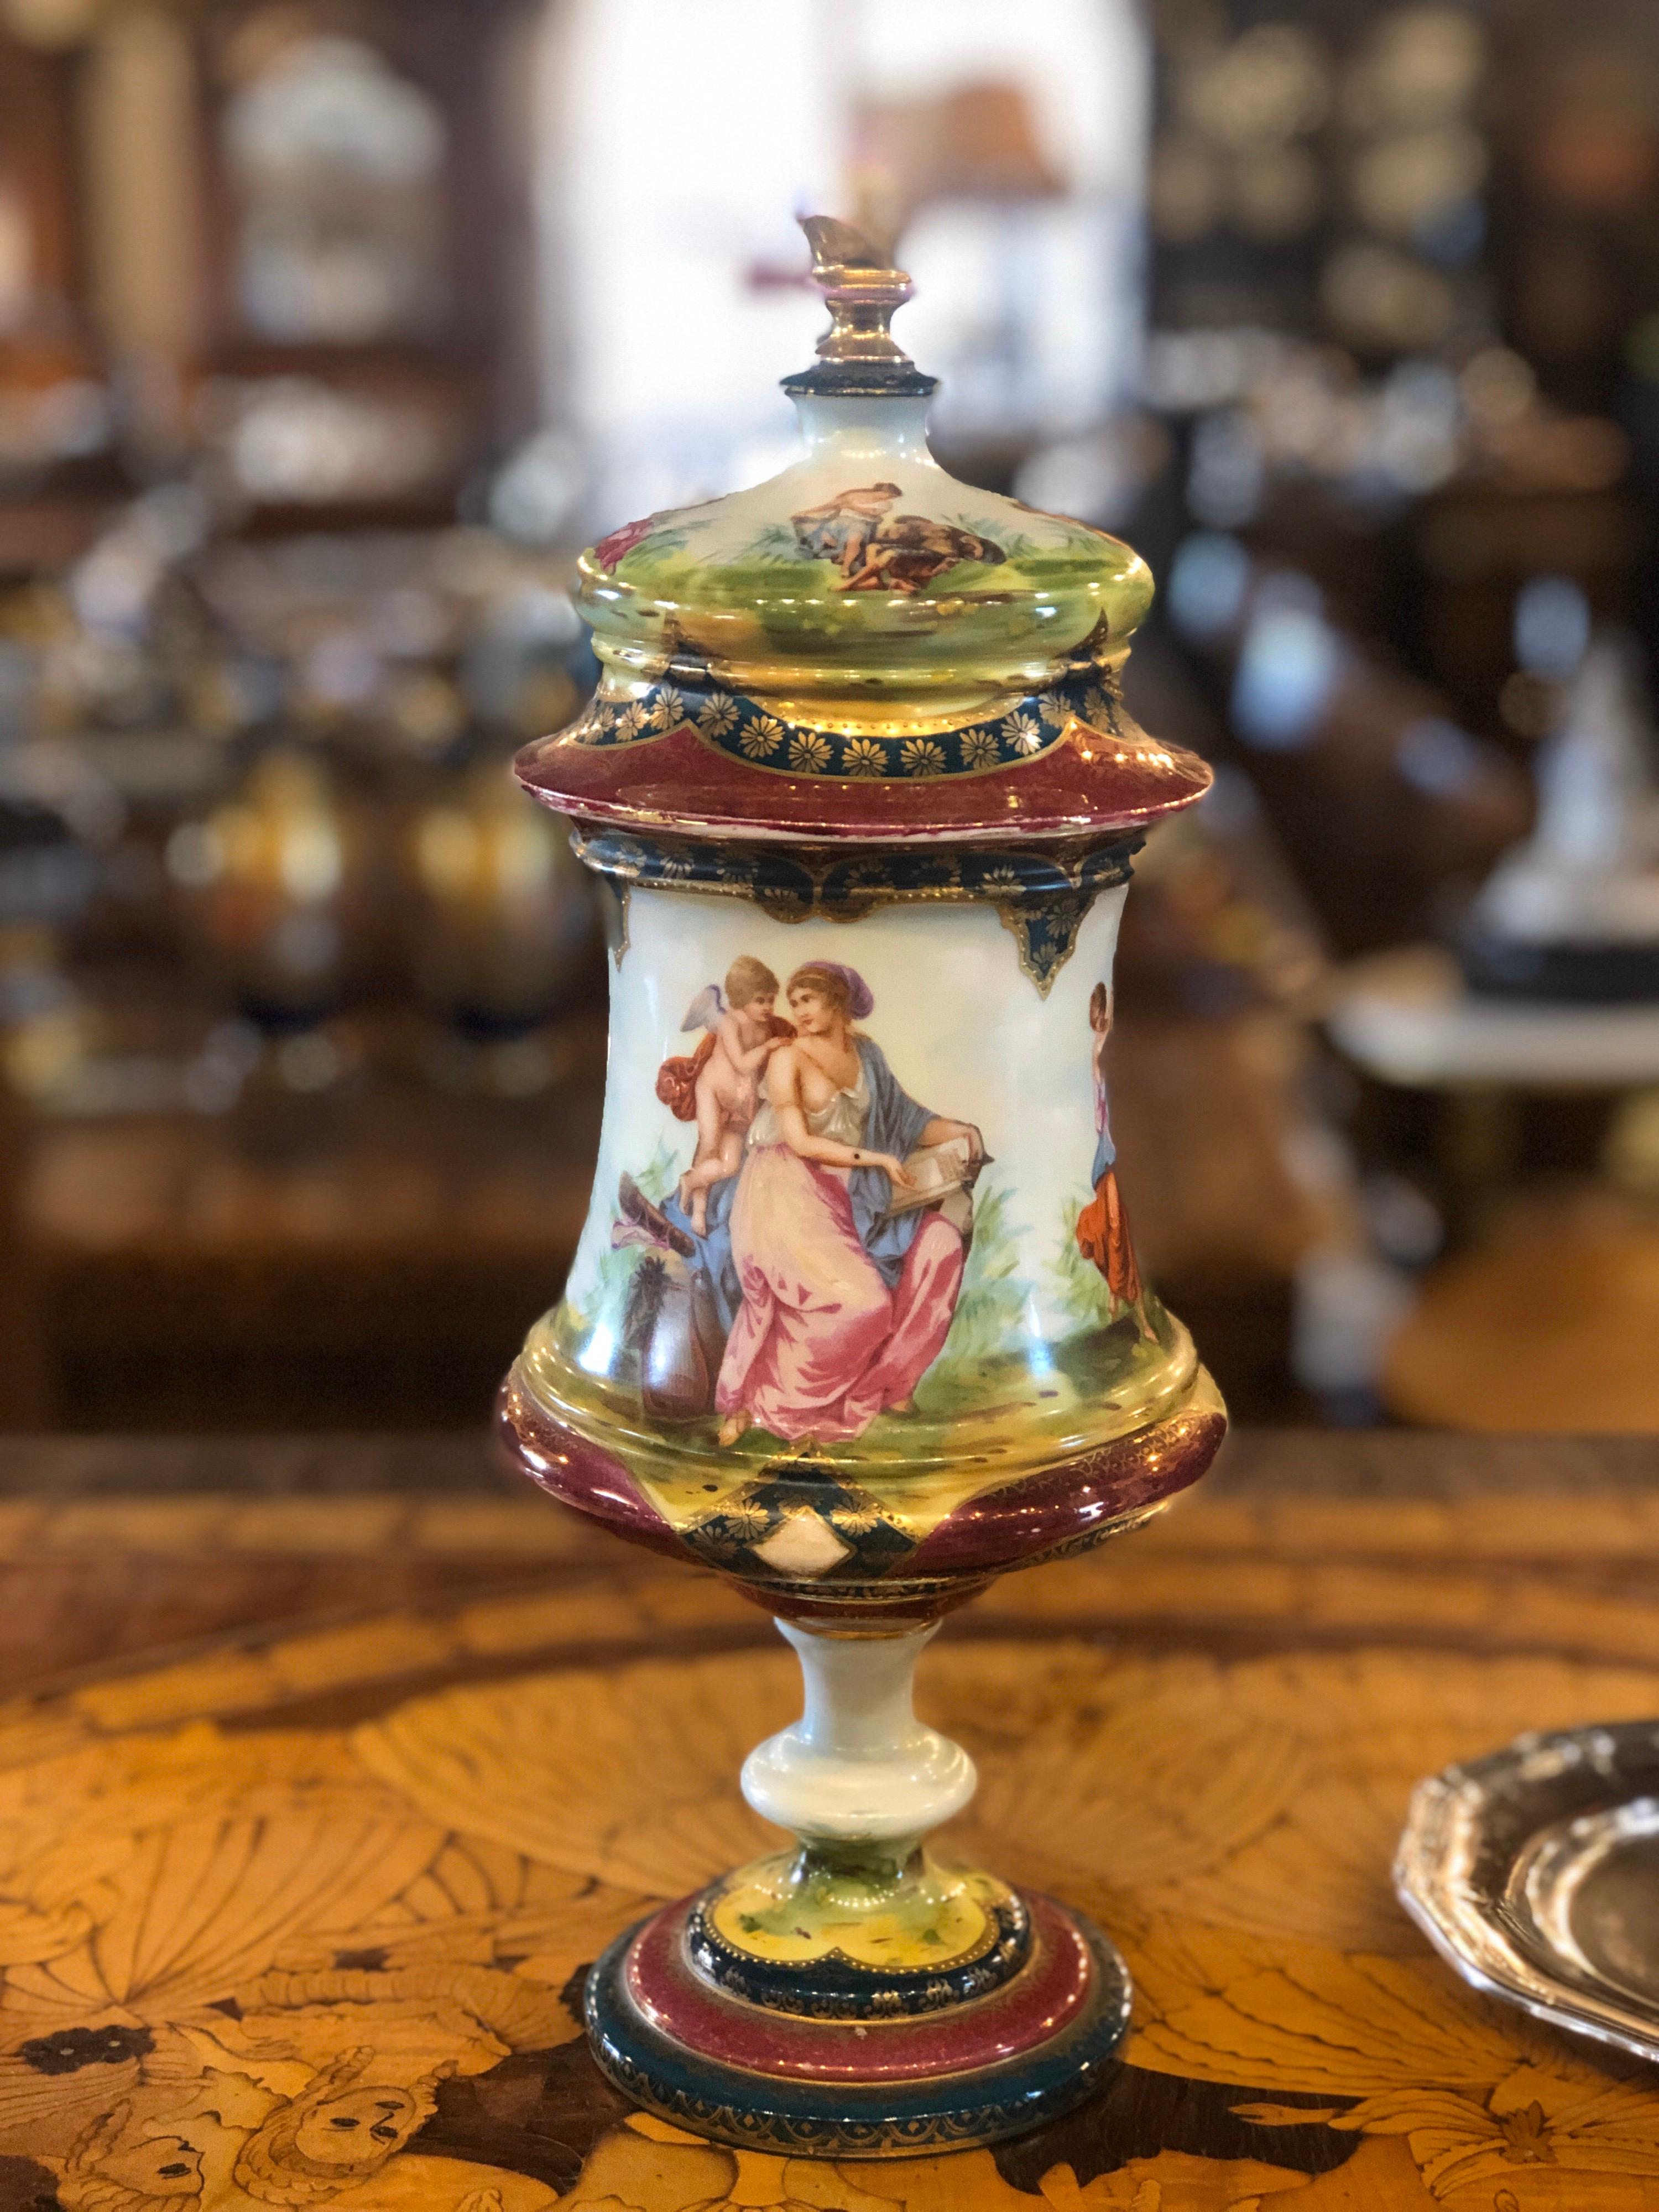 A real Vienna porcelain urn, with Classic figural scenes. Period 19th century in very good state of conservation, this is a beautiful example of fine Vienna royal porcelain.

Brand under the foot corresponding to the years 1860-1880.